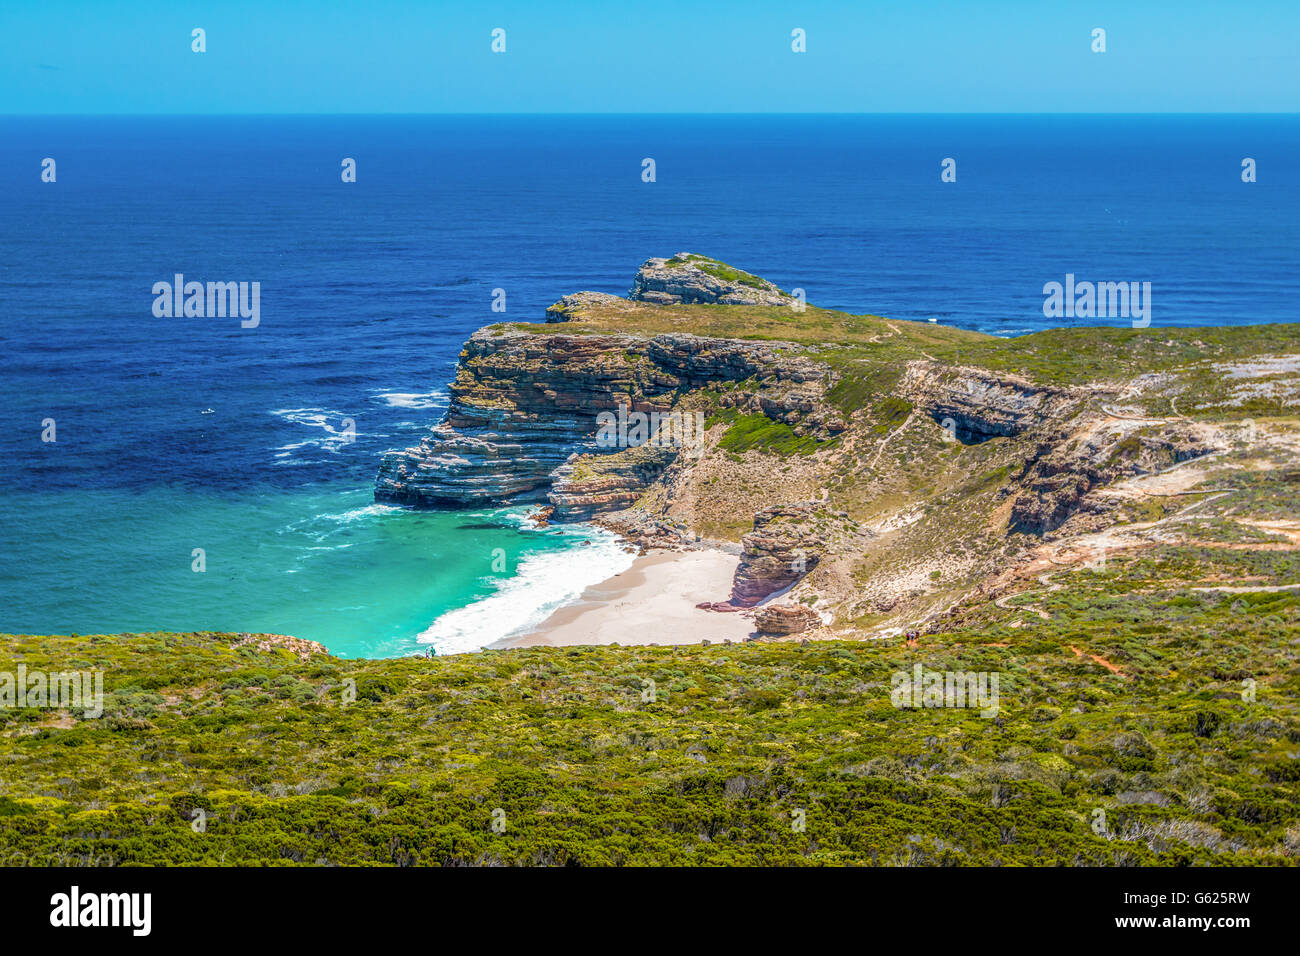 The Cape of Good hope peninsula in Cape town Stock Photo